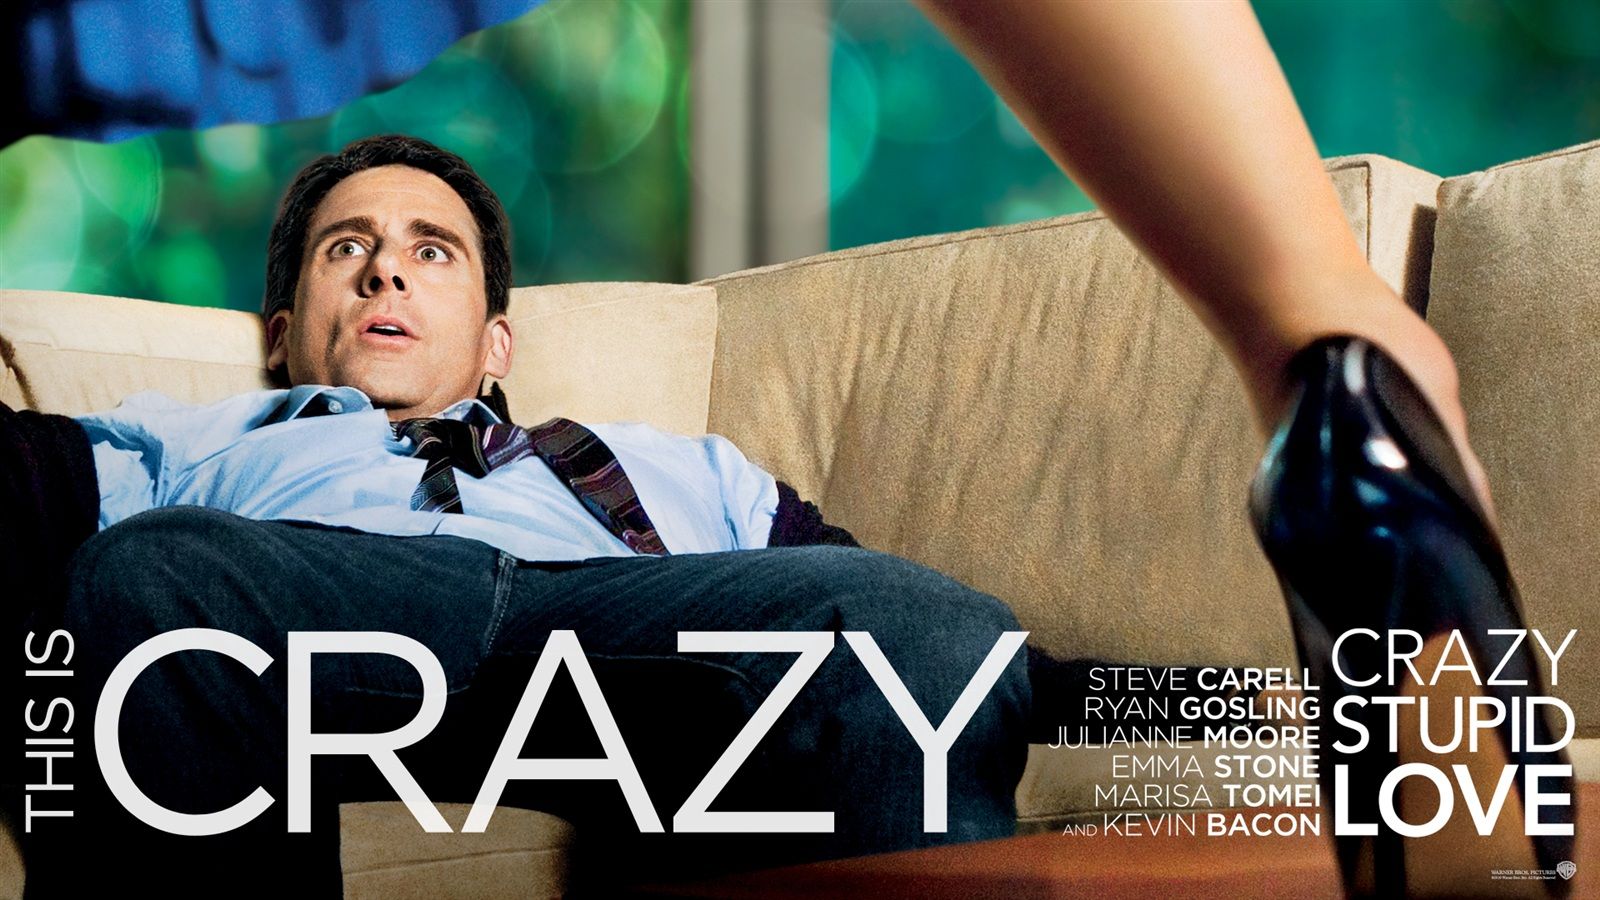 Wallpaper Crazy, Stupid, Love 1920x1080 Full HD 2K Picture, Image